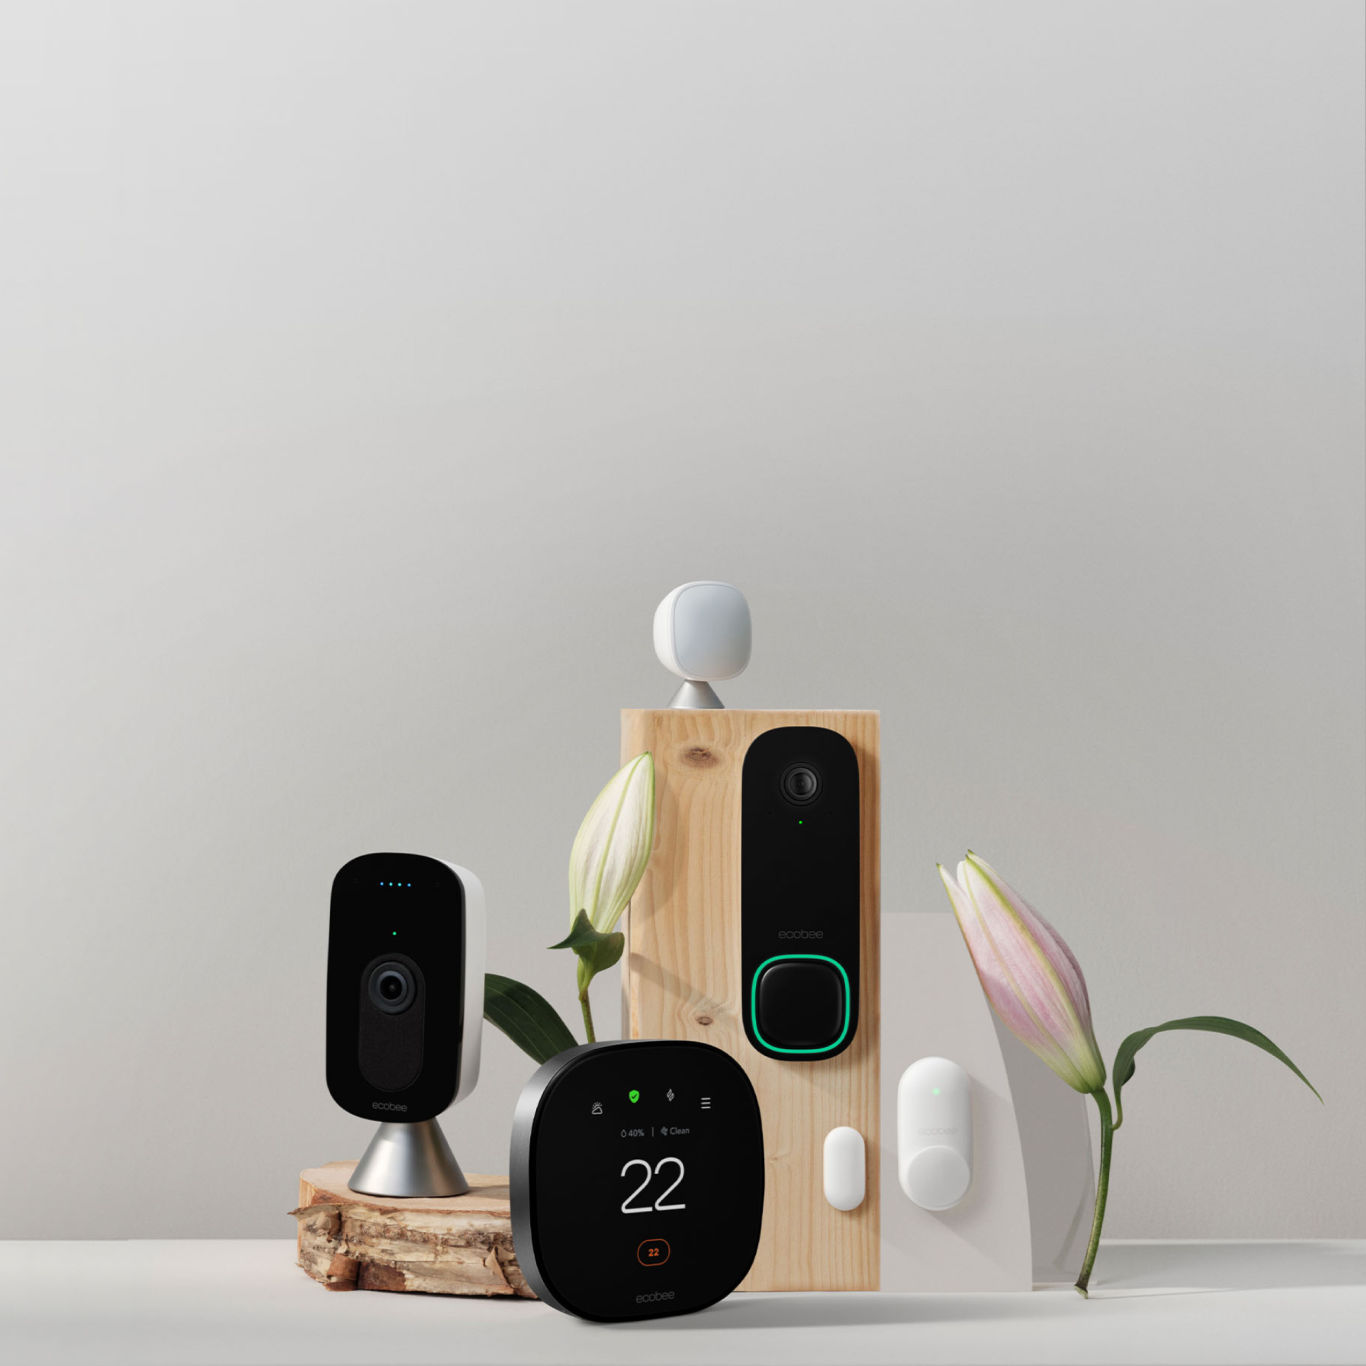 ecobee products on a grey background with wood and flowers